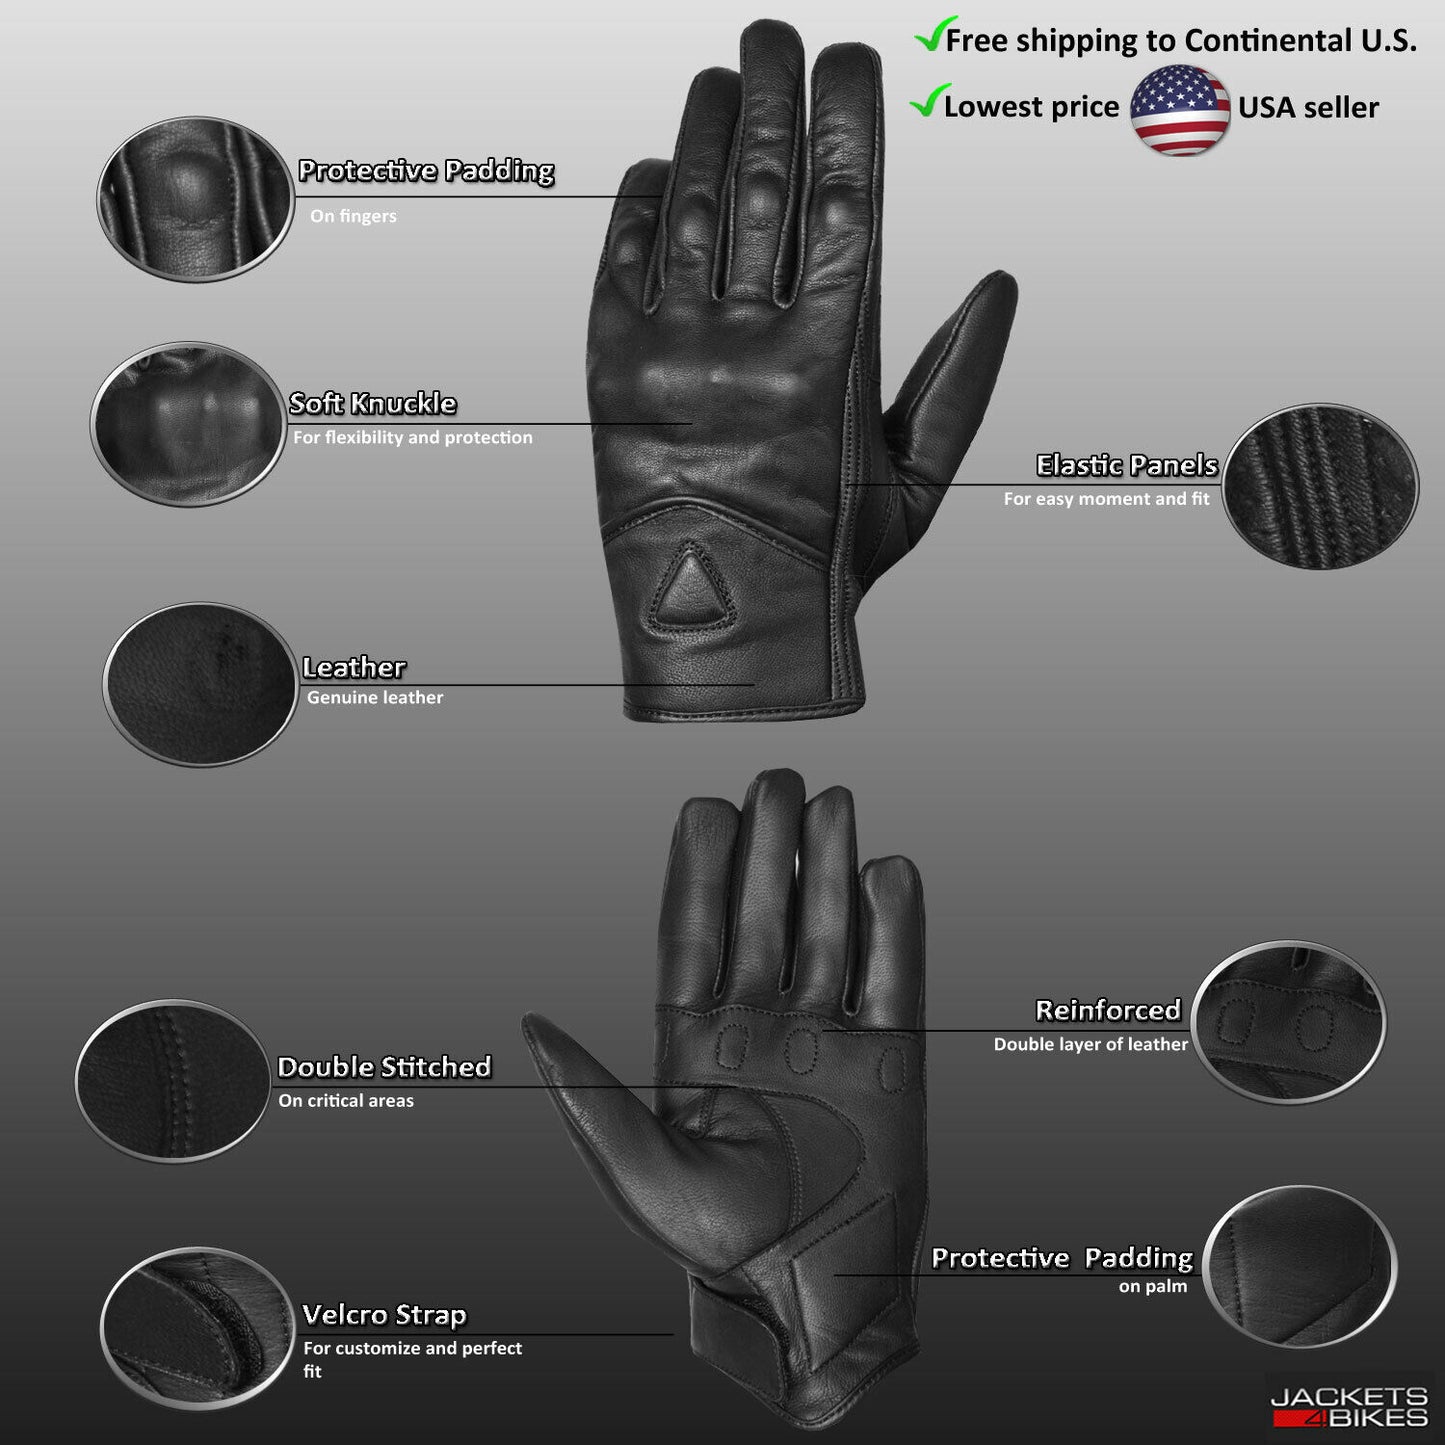 Motorcycle Bicycle Riding Racing Bike Protective Armor Gel Leather Gloves BlackWhite